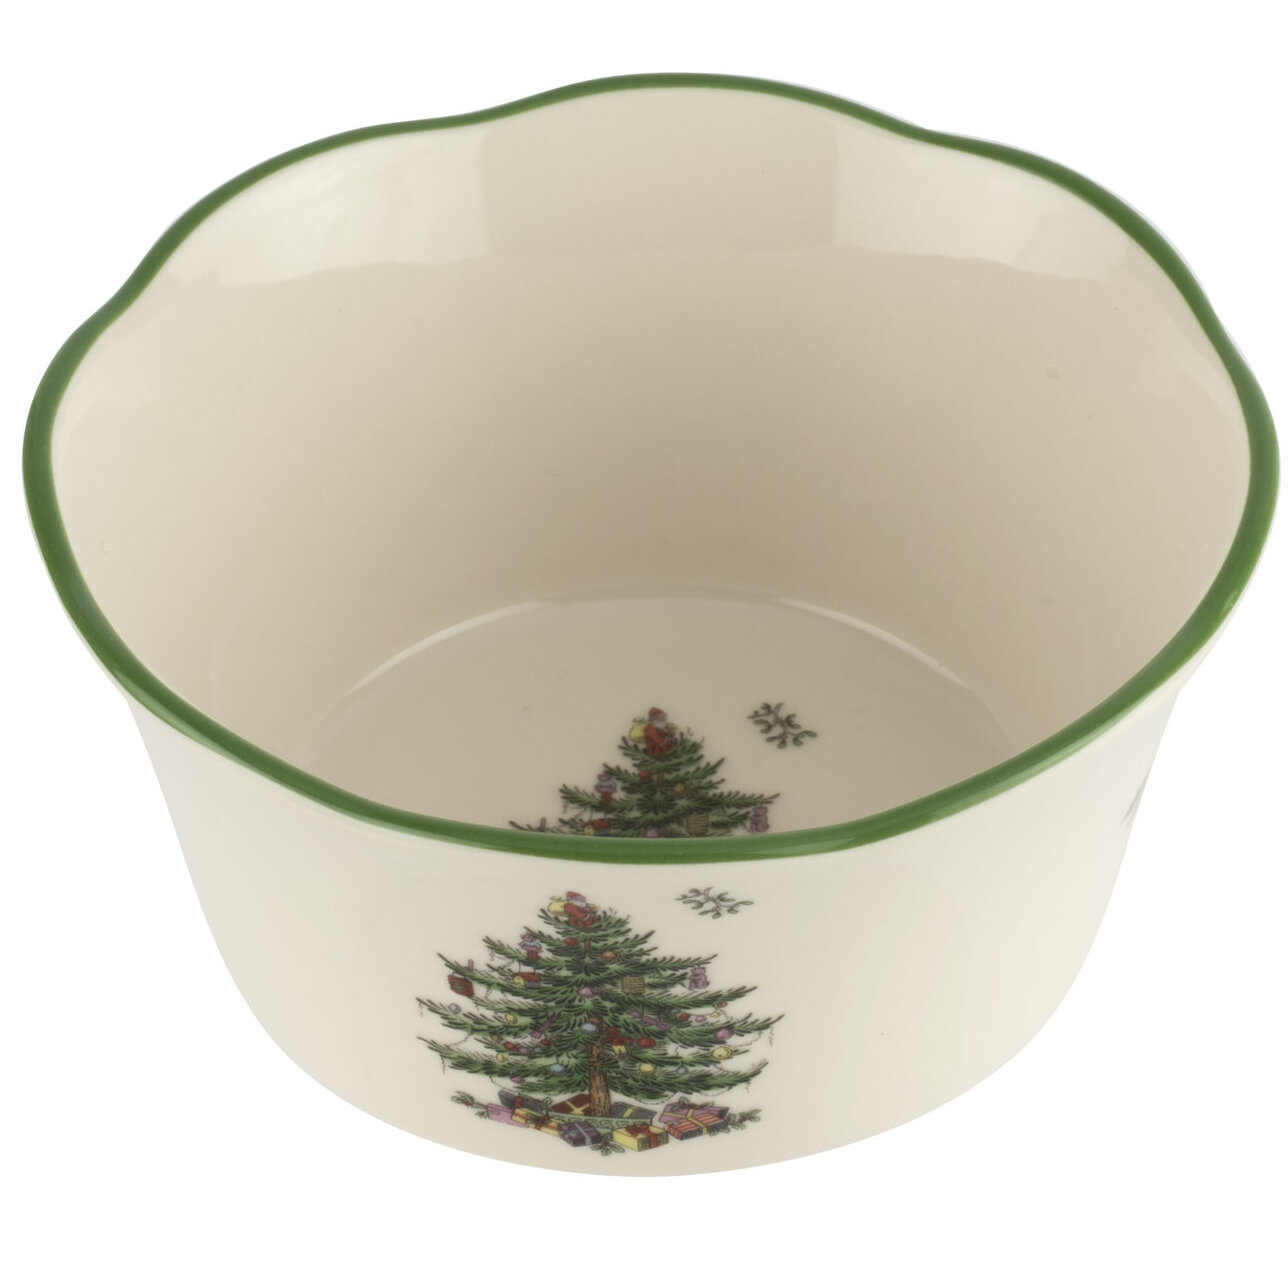 Spode Christmas Tree Cranberry Bowl with Slotted Spoon 